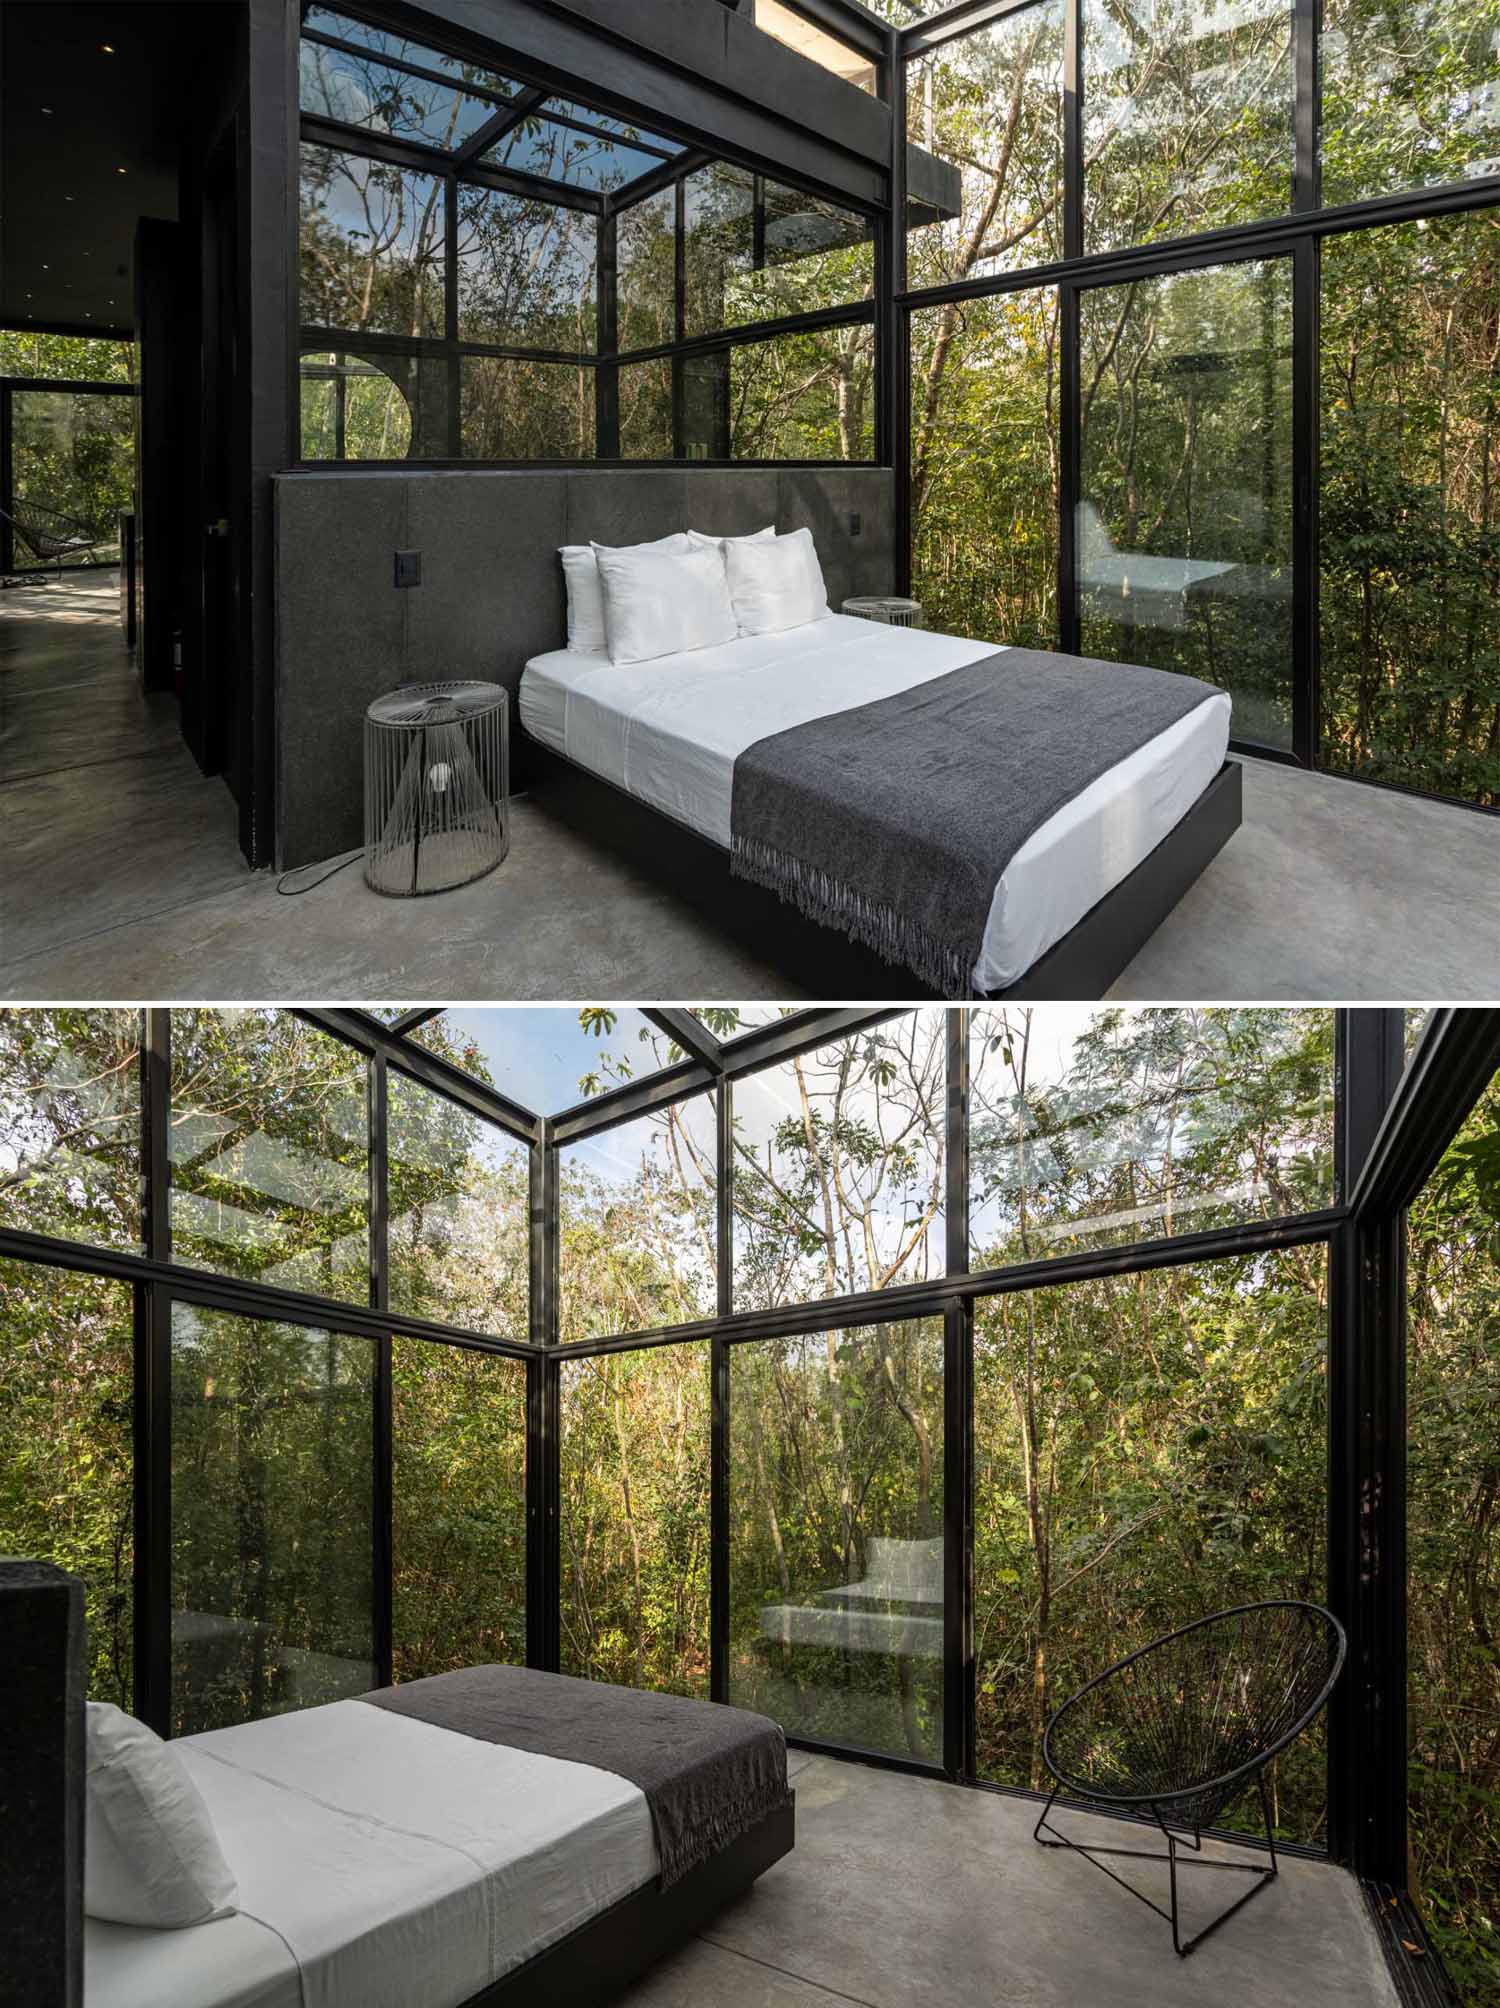 The black-framed windows and sliding walls of the bedrooms in this off-grid cabins, allow the guests to feel like they are sleeping within the dense jungle and are one with nature.